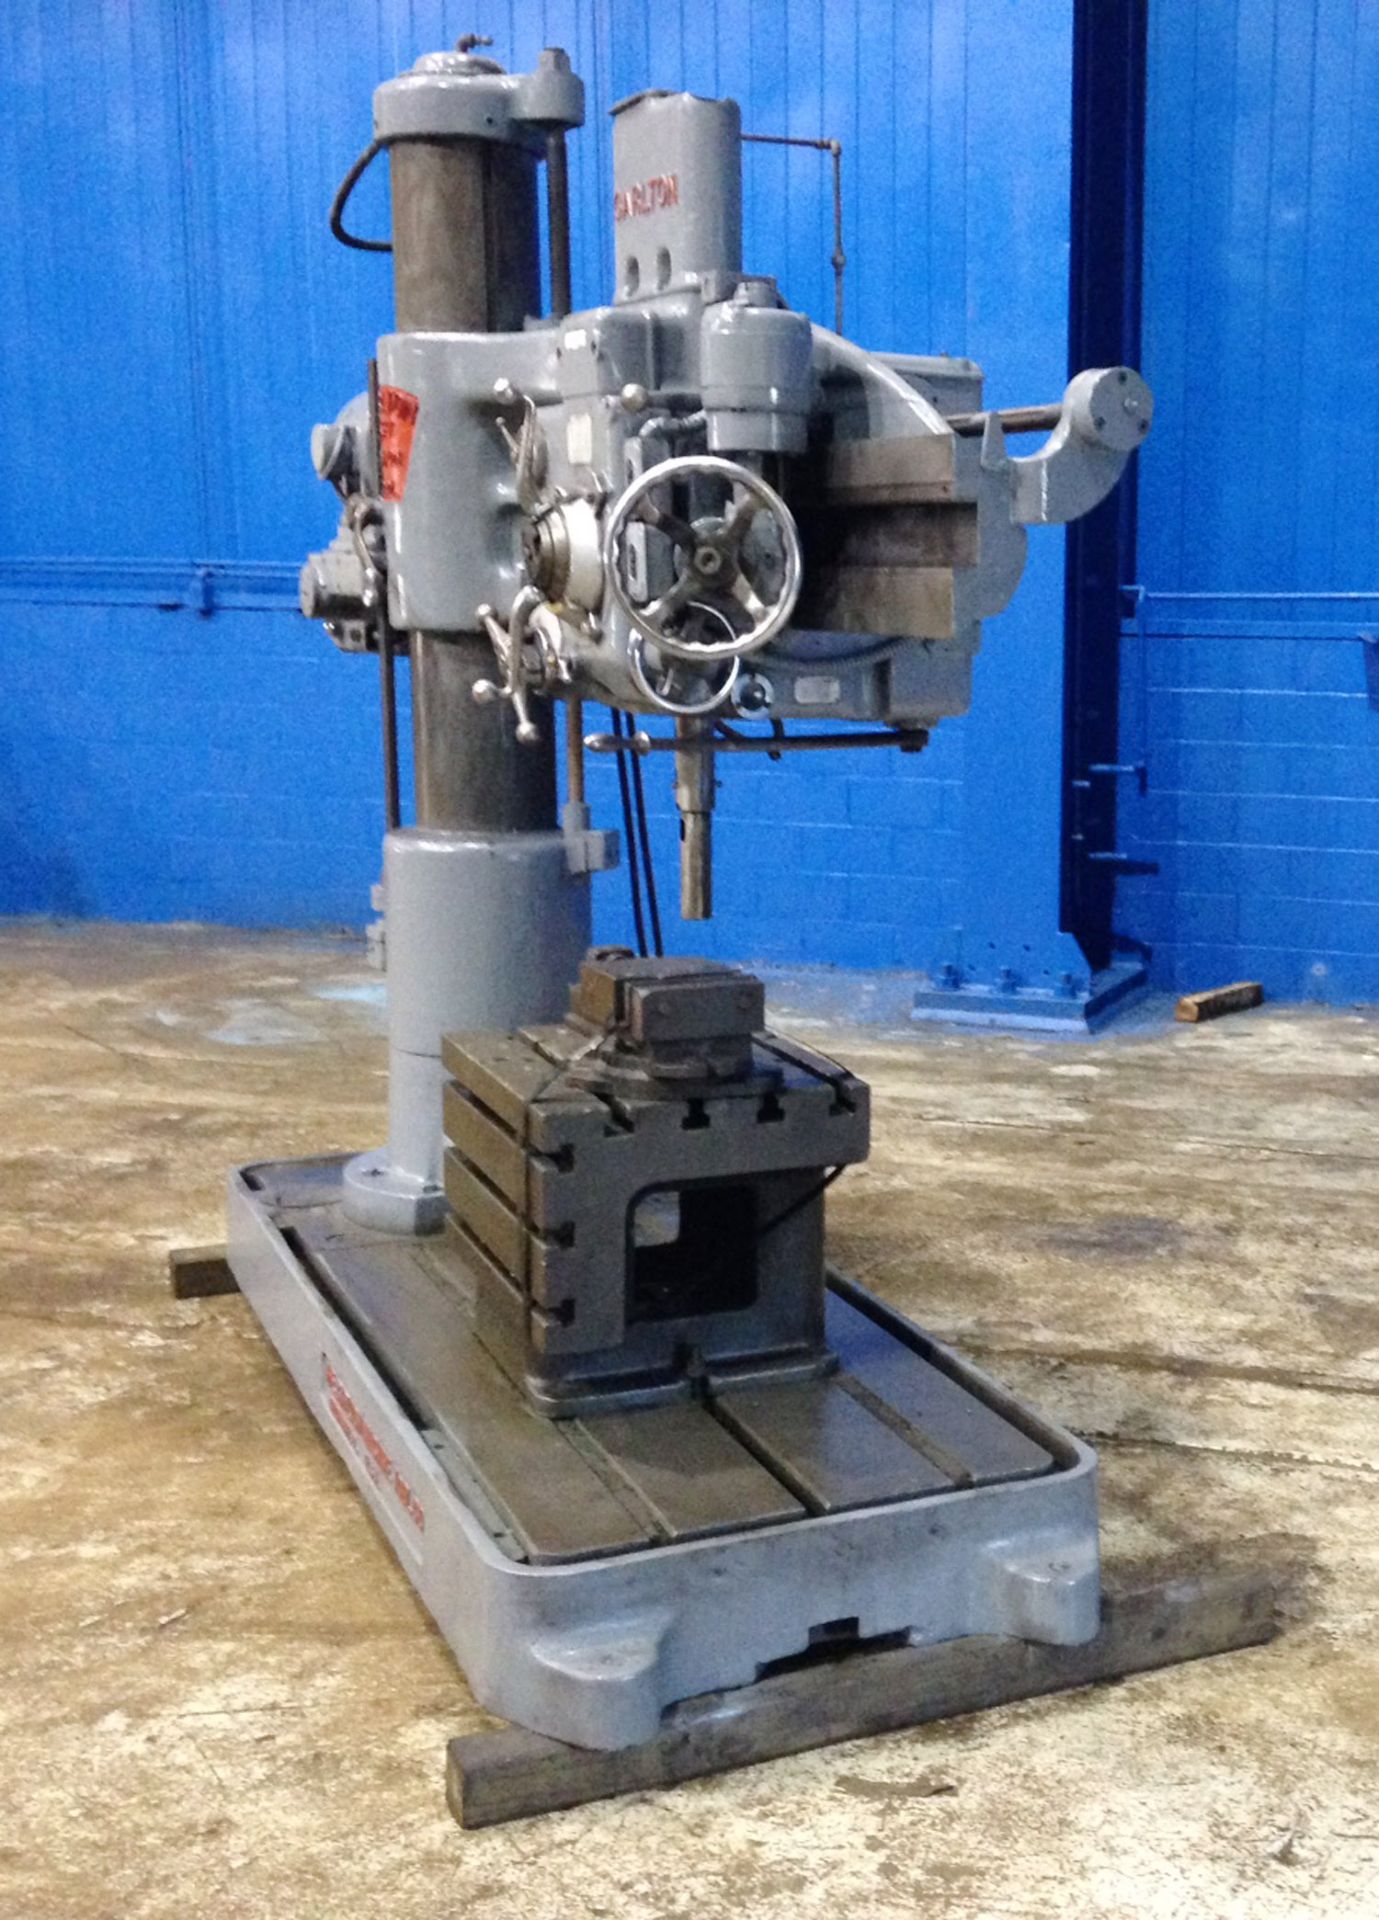 FREE LOADING - Located In: Painesville, OH - Carlton Radial Arm Drill, 5' x 11", Mdl: 1A, S/N: 1254 - Image 3 of 6